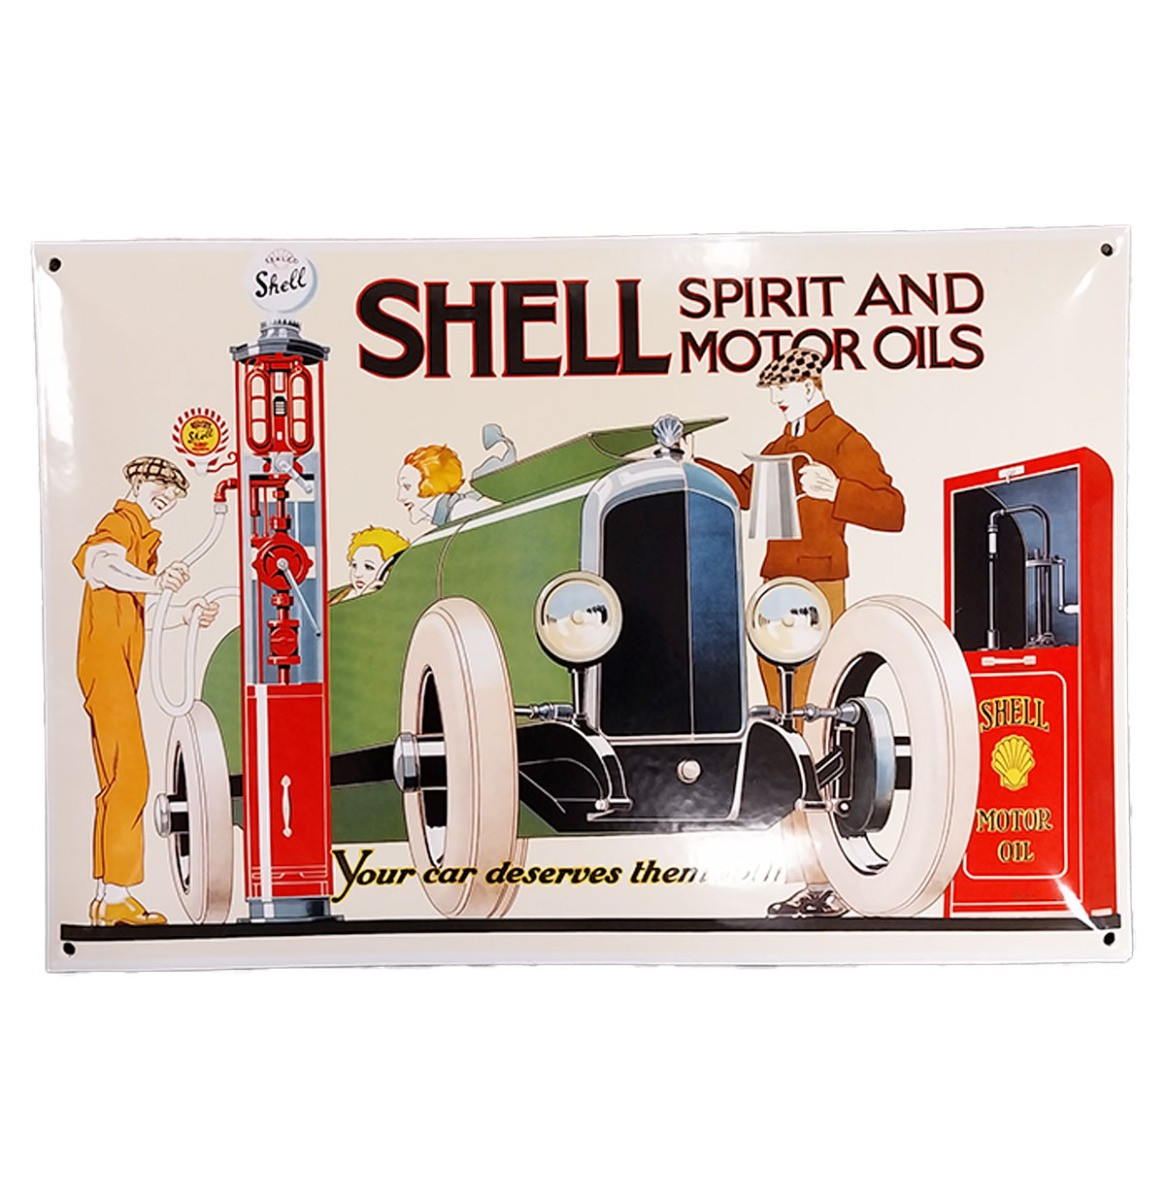 Shell Spirit And Motor Oils Emaille Bord - 52 x 35cm